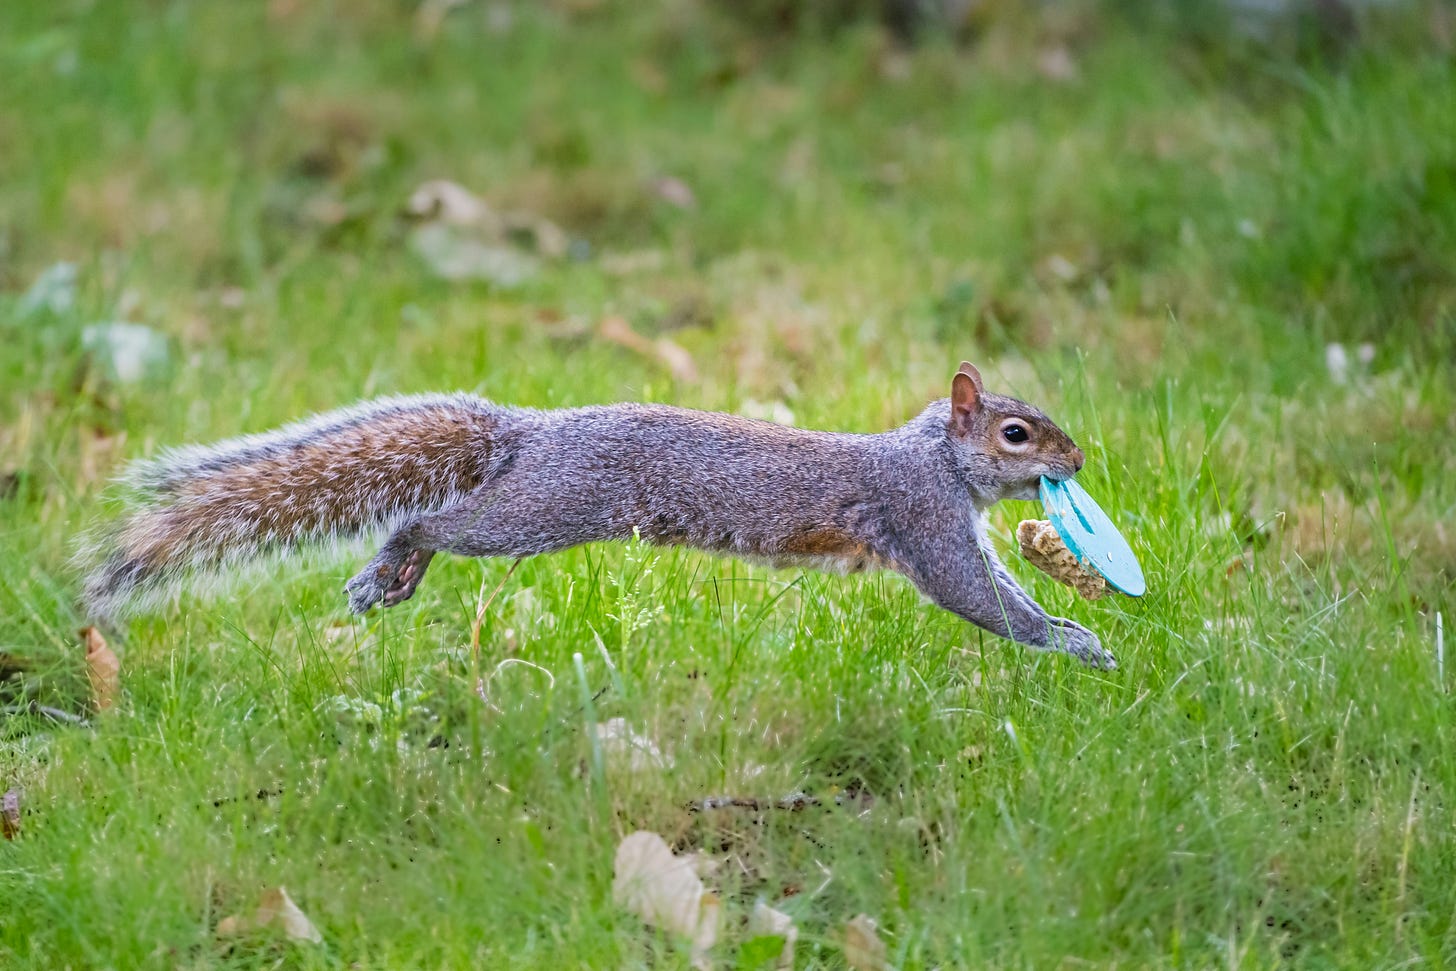 The photographer's description of this image is "A cheeky grey squirrel stealing bird food in the garden and running off with it."